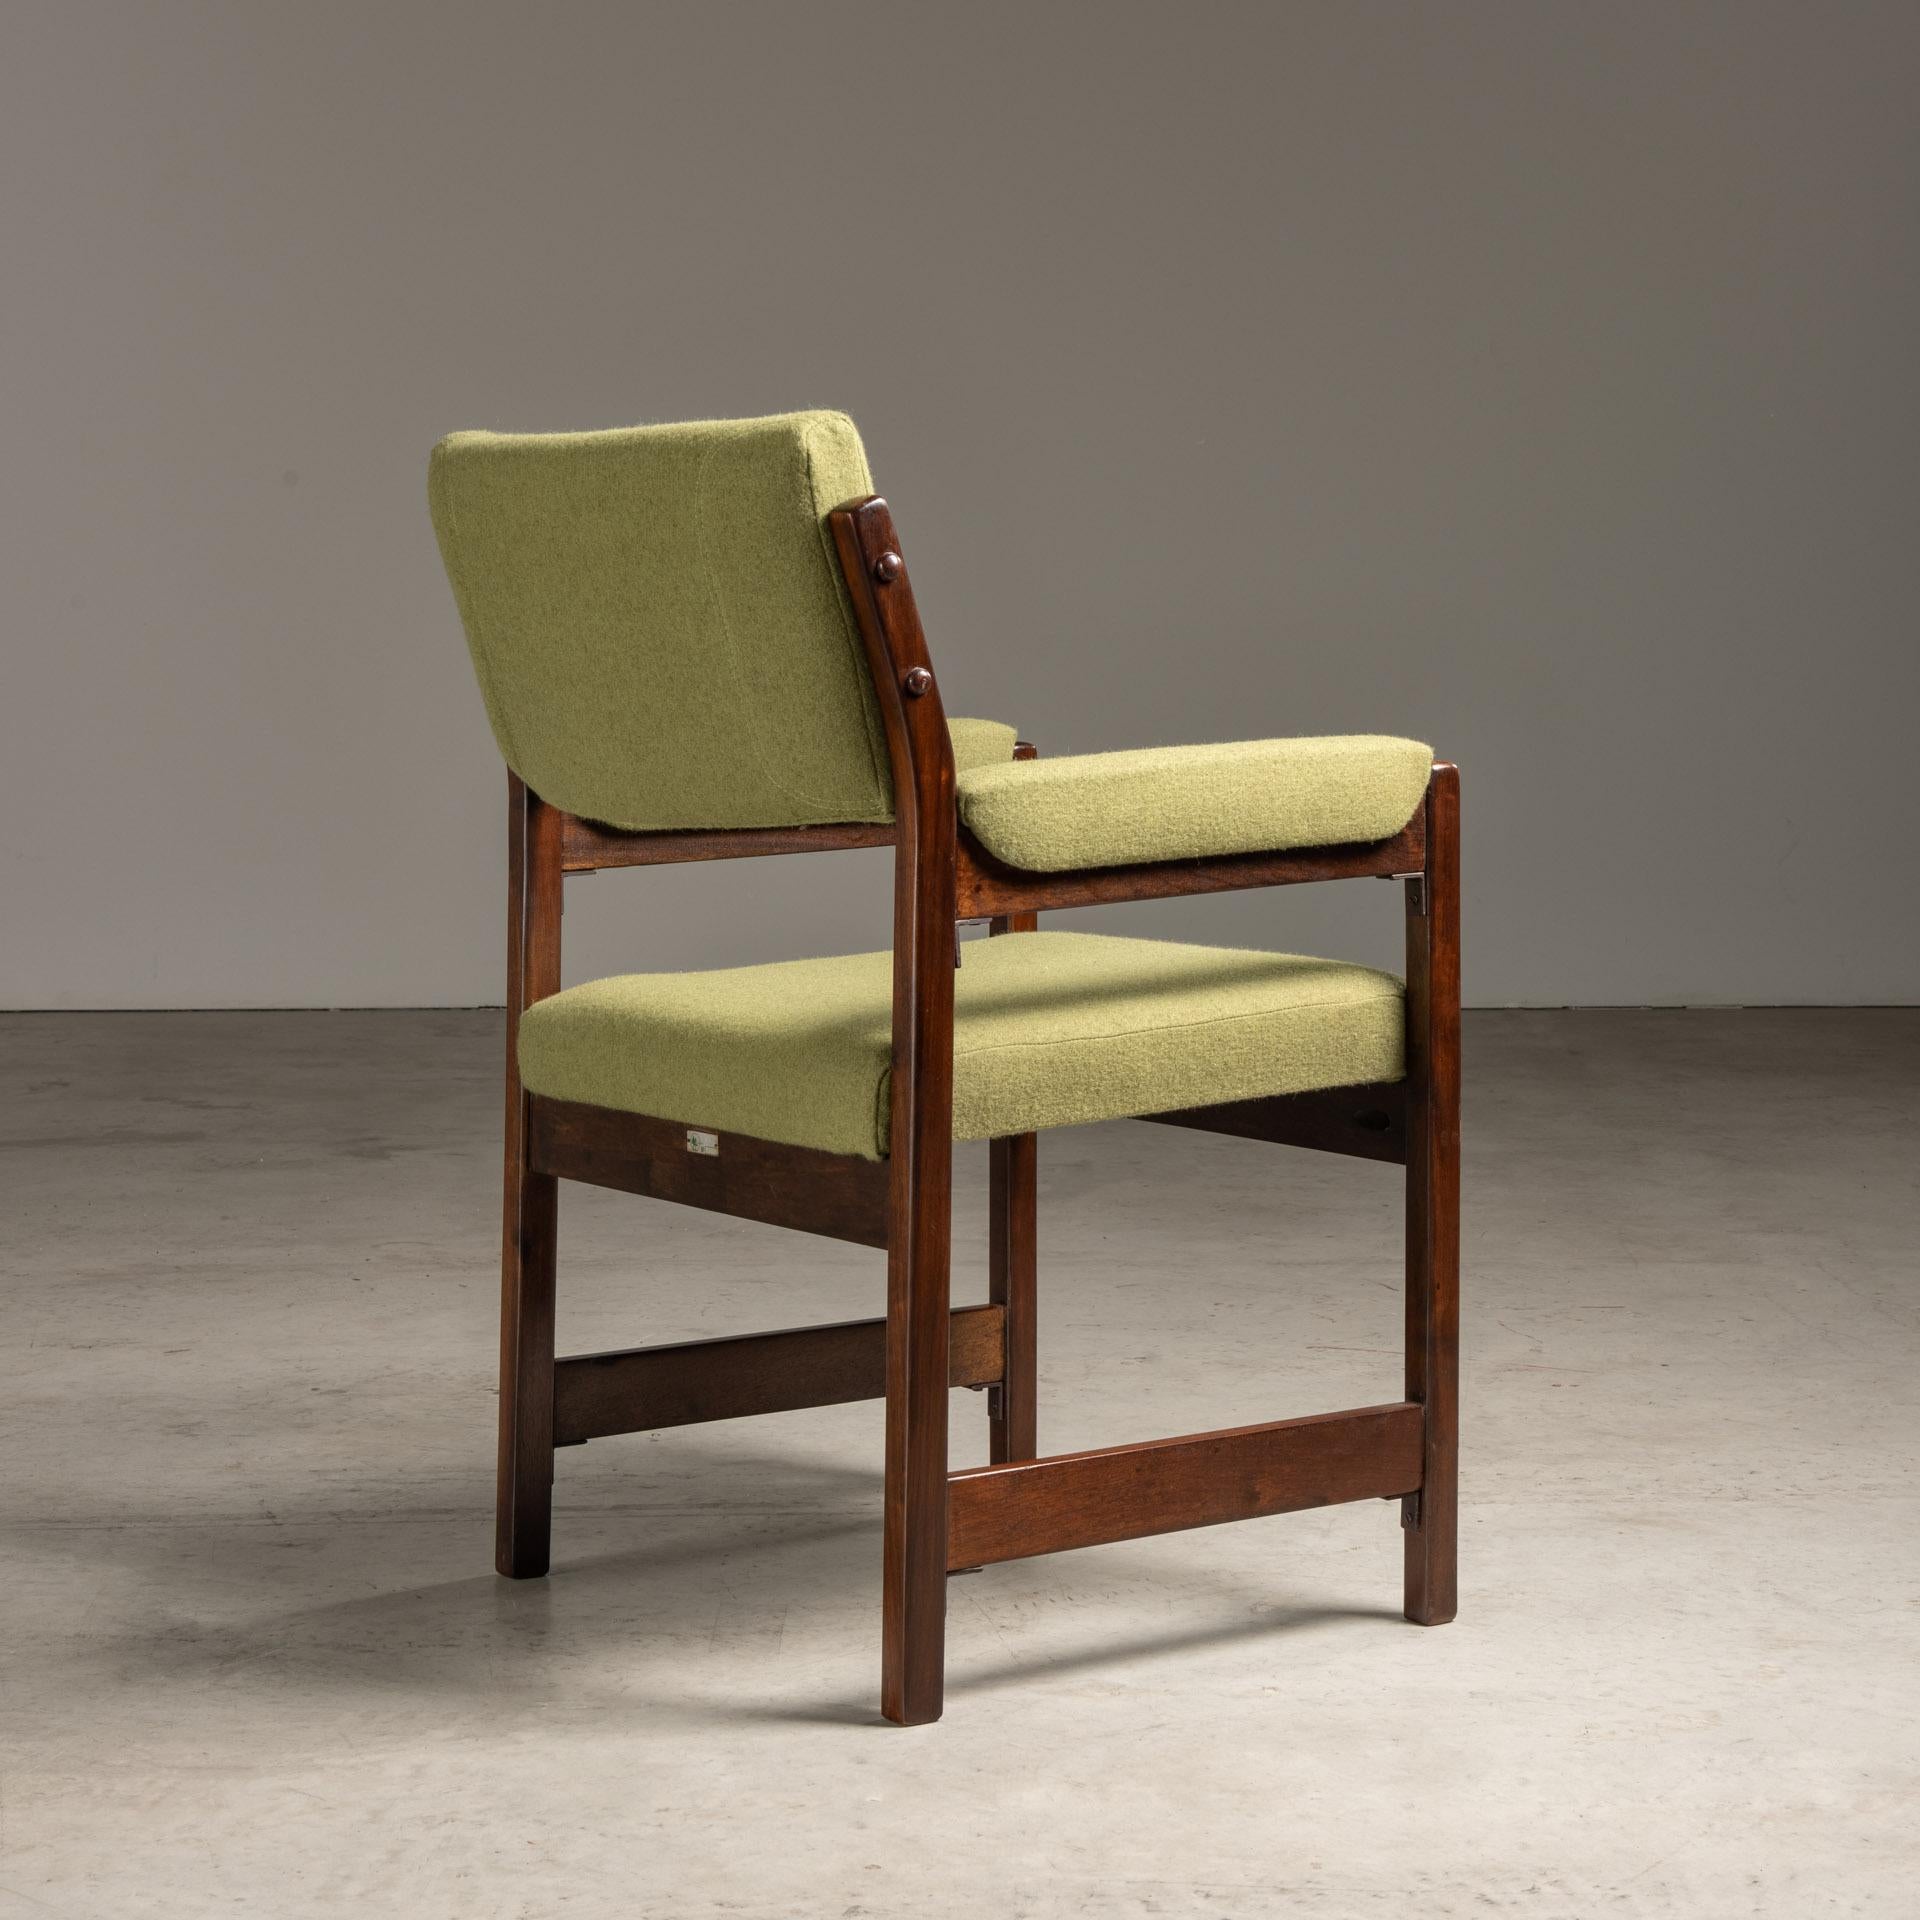 Set of Chairs in Solid Hardwood and Green Fabric, Brazilian Mid-Century Modern For Sale 2